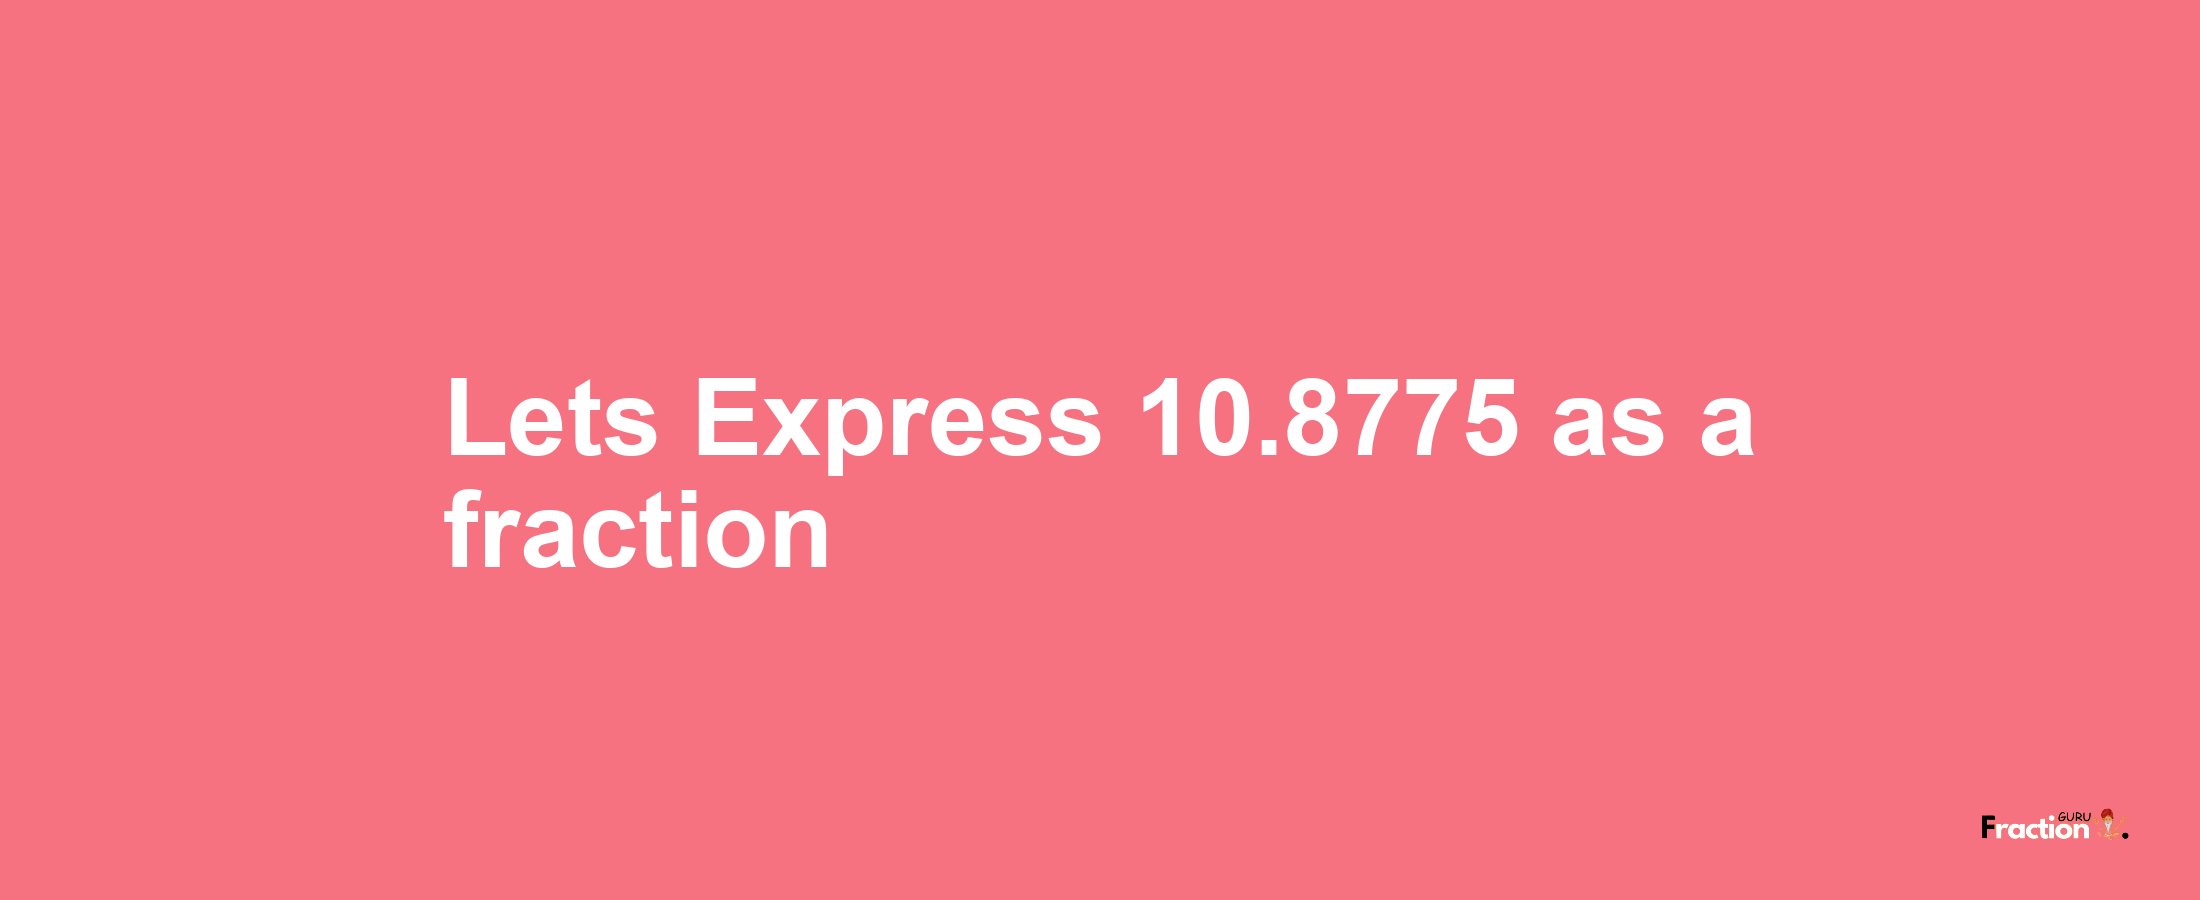 Lets Express 10.8775 as afraction